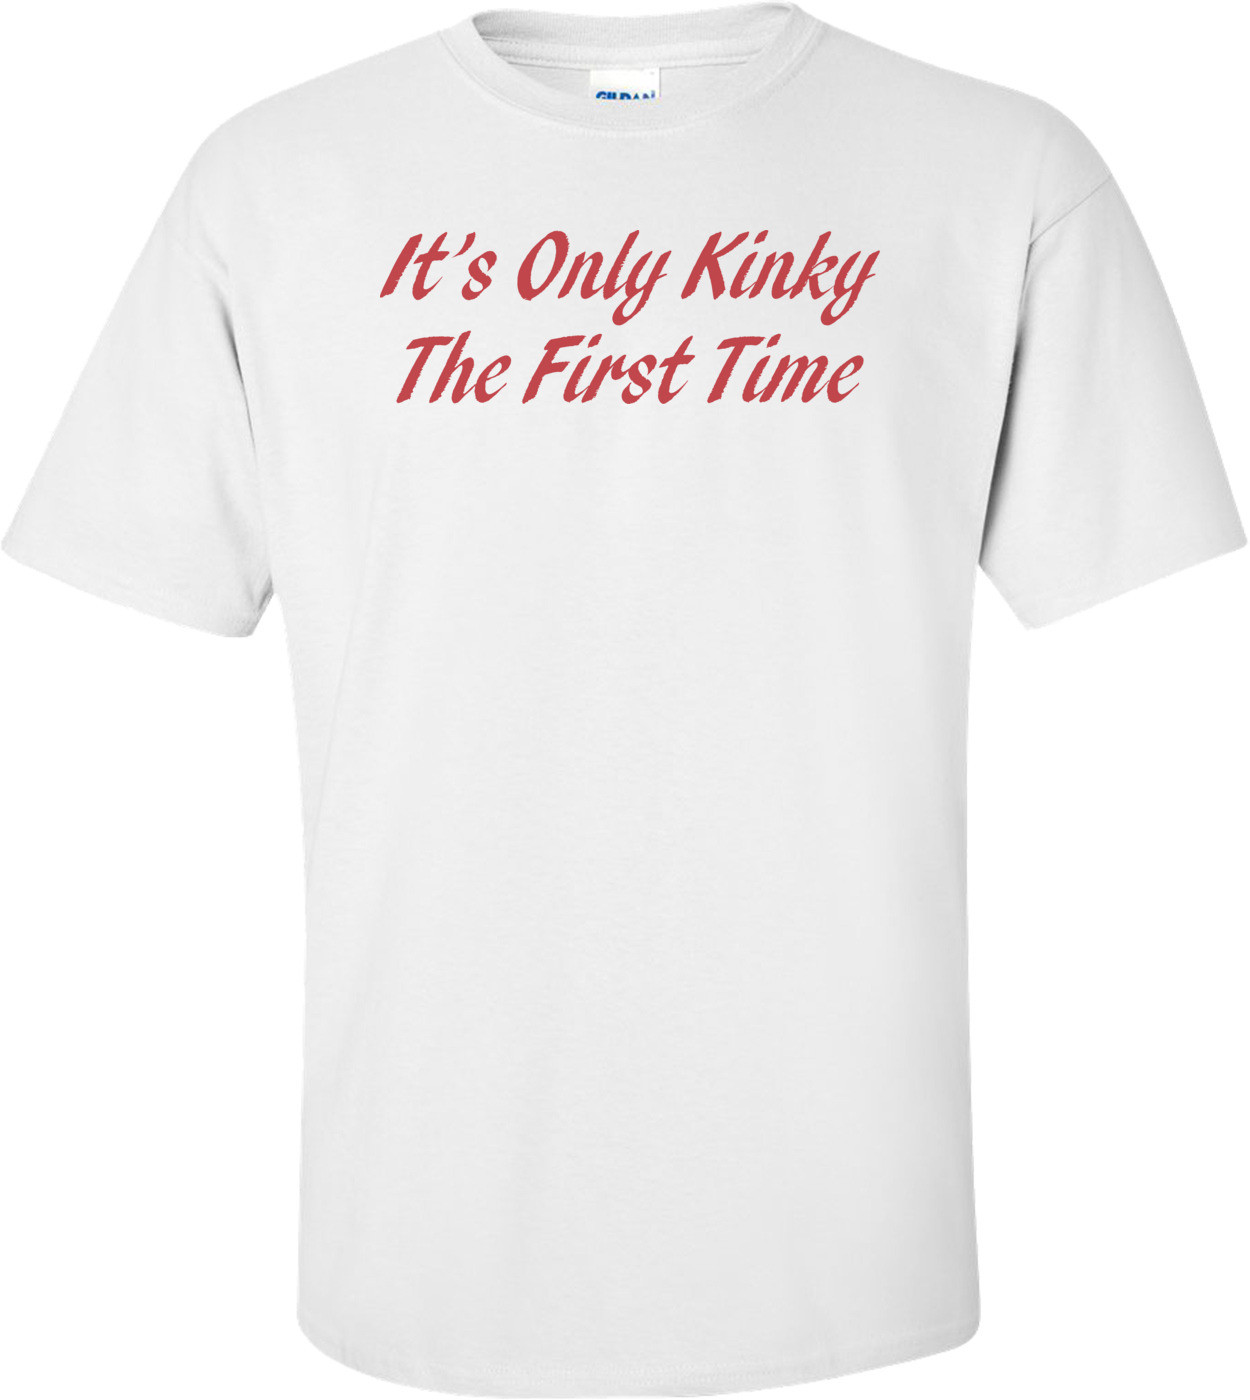 It's Only Kinky The First Time T-shirt